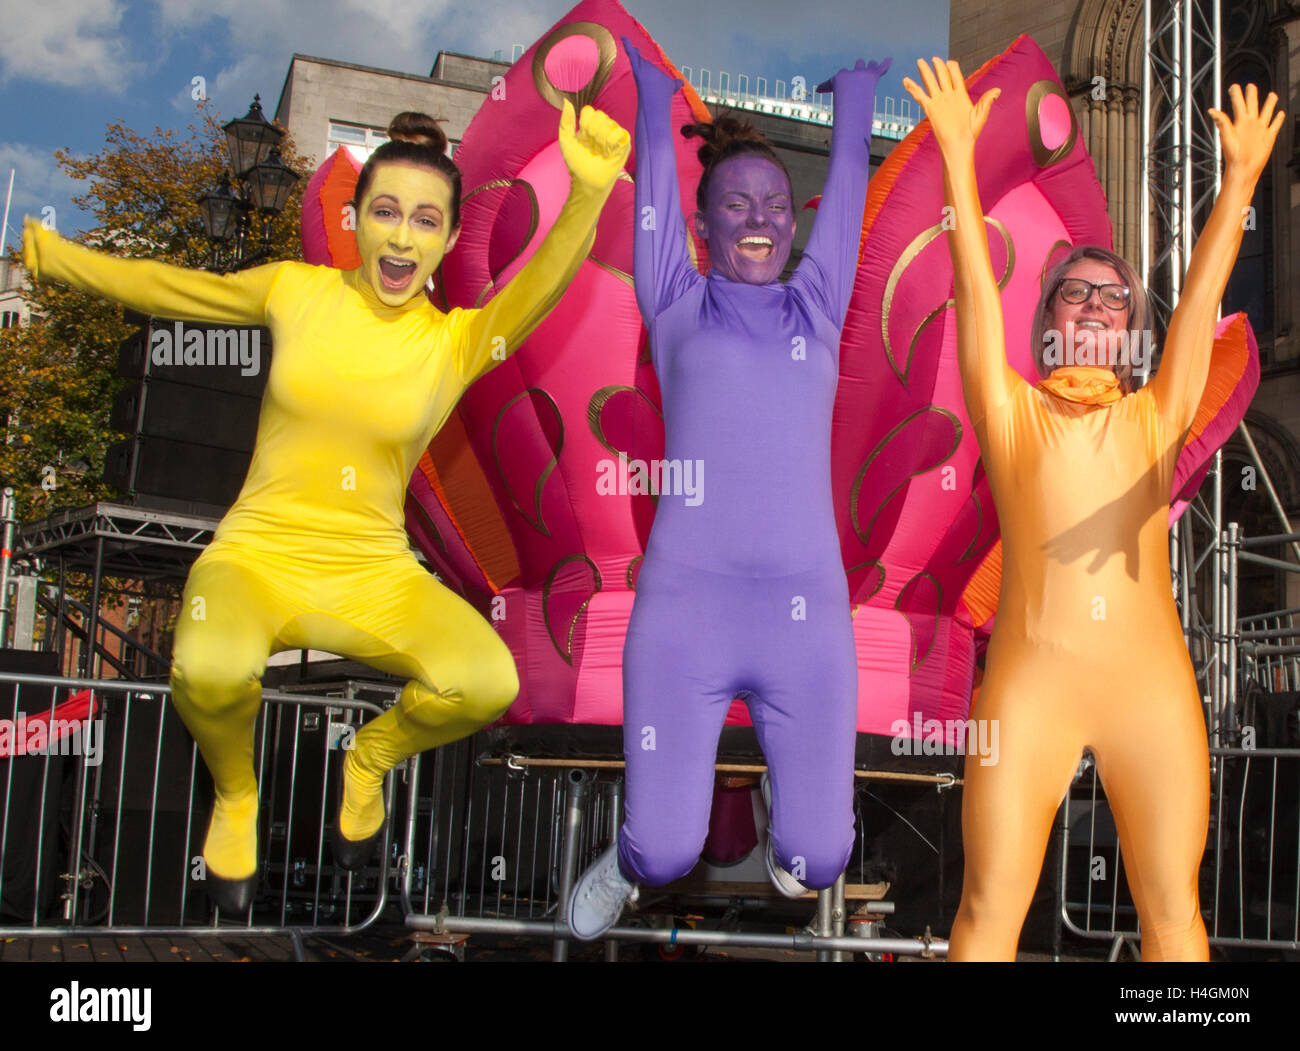 Three Agency actors leaping in Morphsuits at Indian festival in Manchester, UK Stock Photo